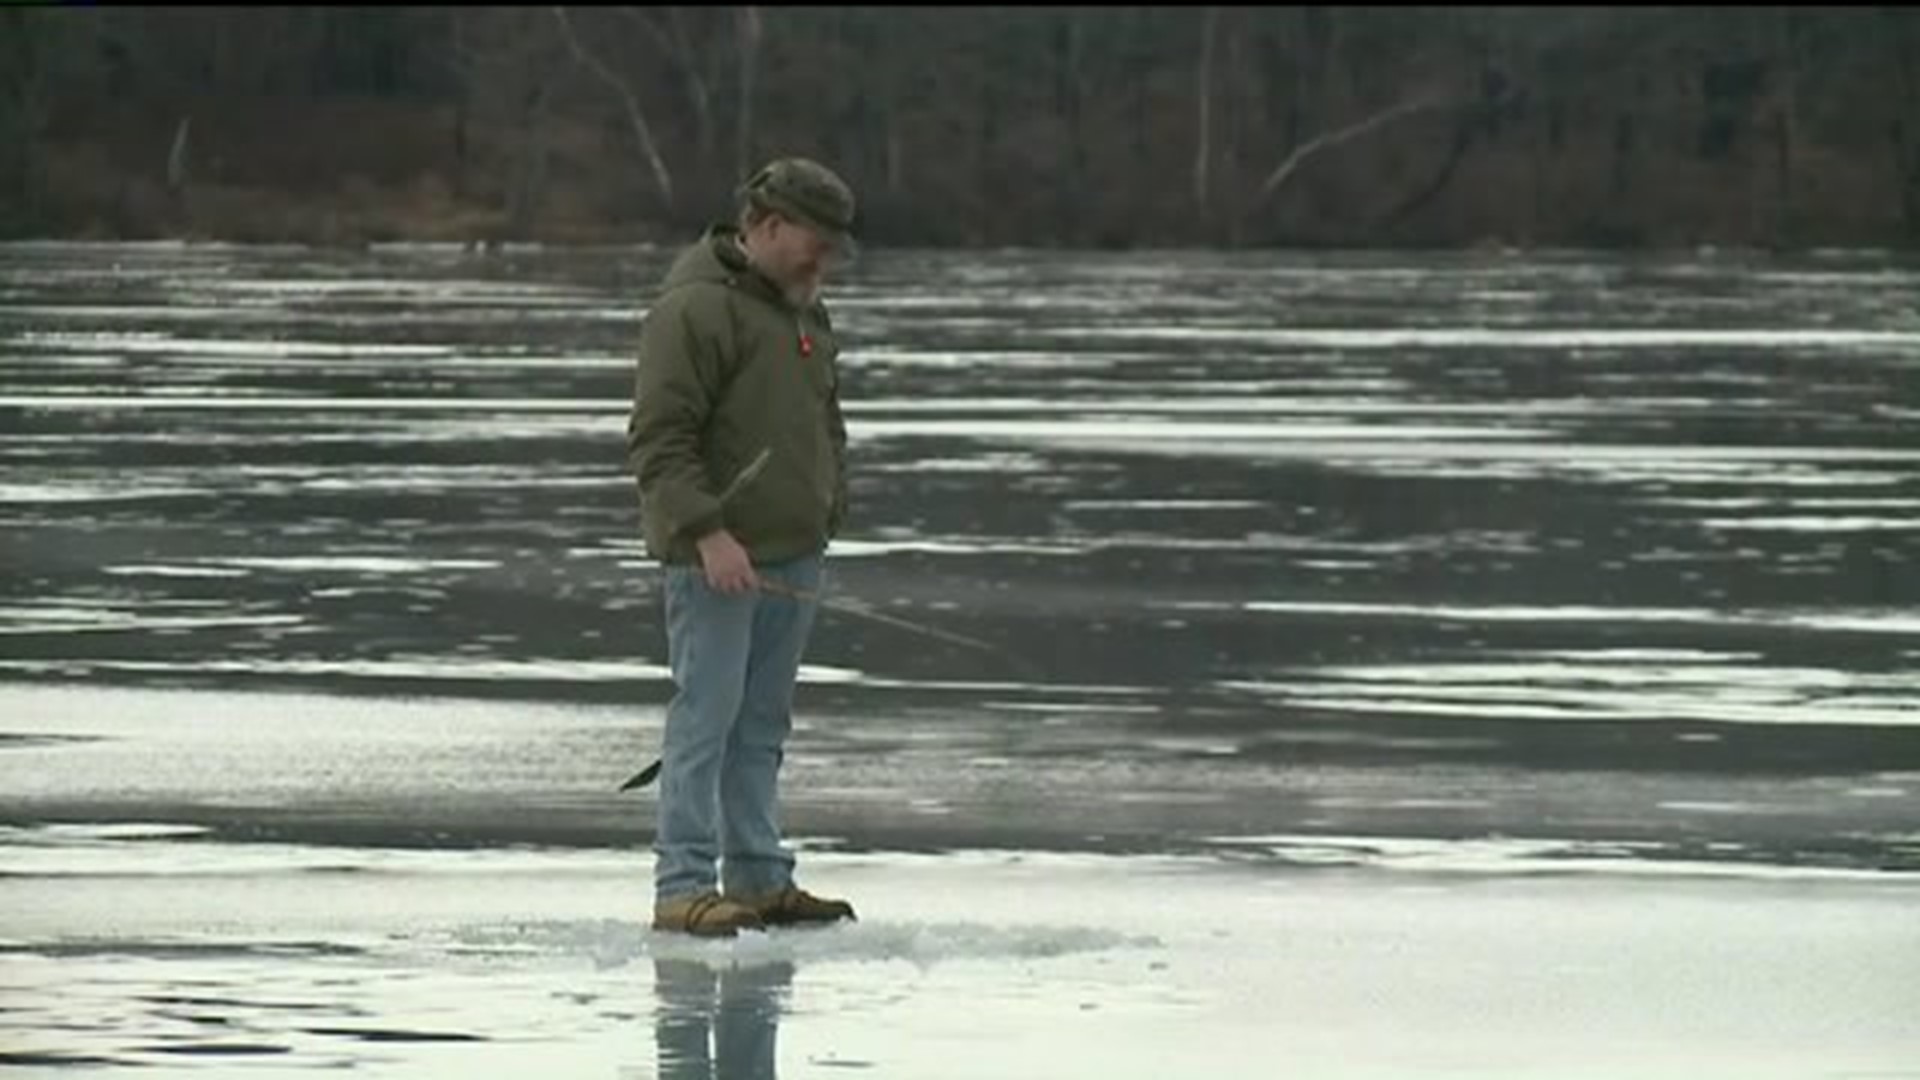 Warm Weather Makes for Messy Ice Fishing